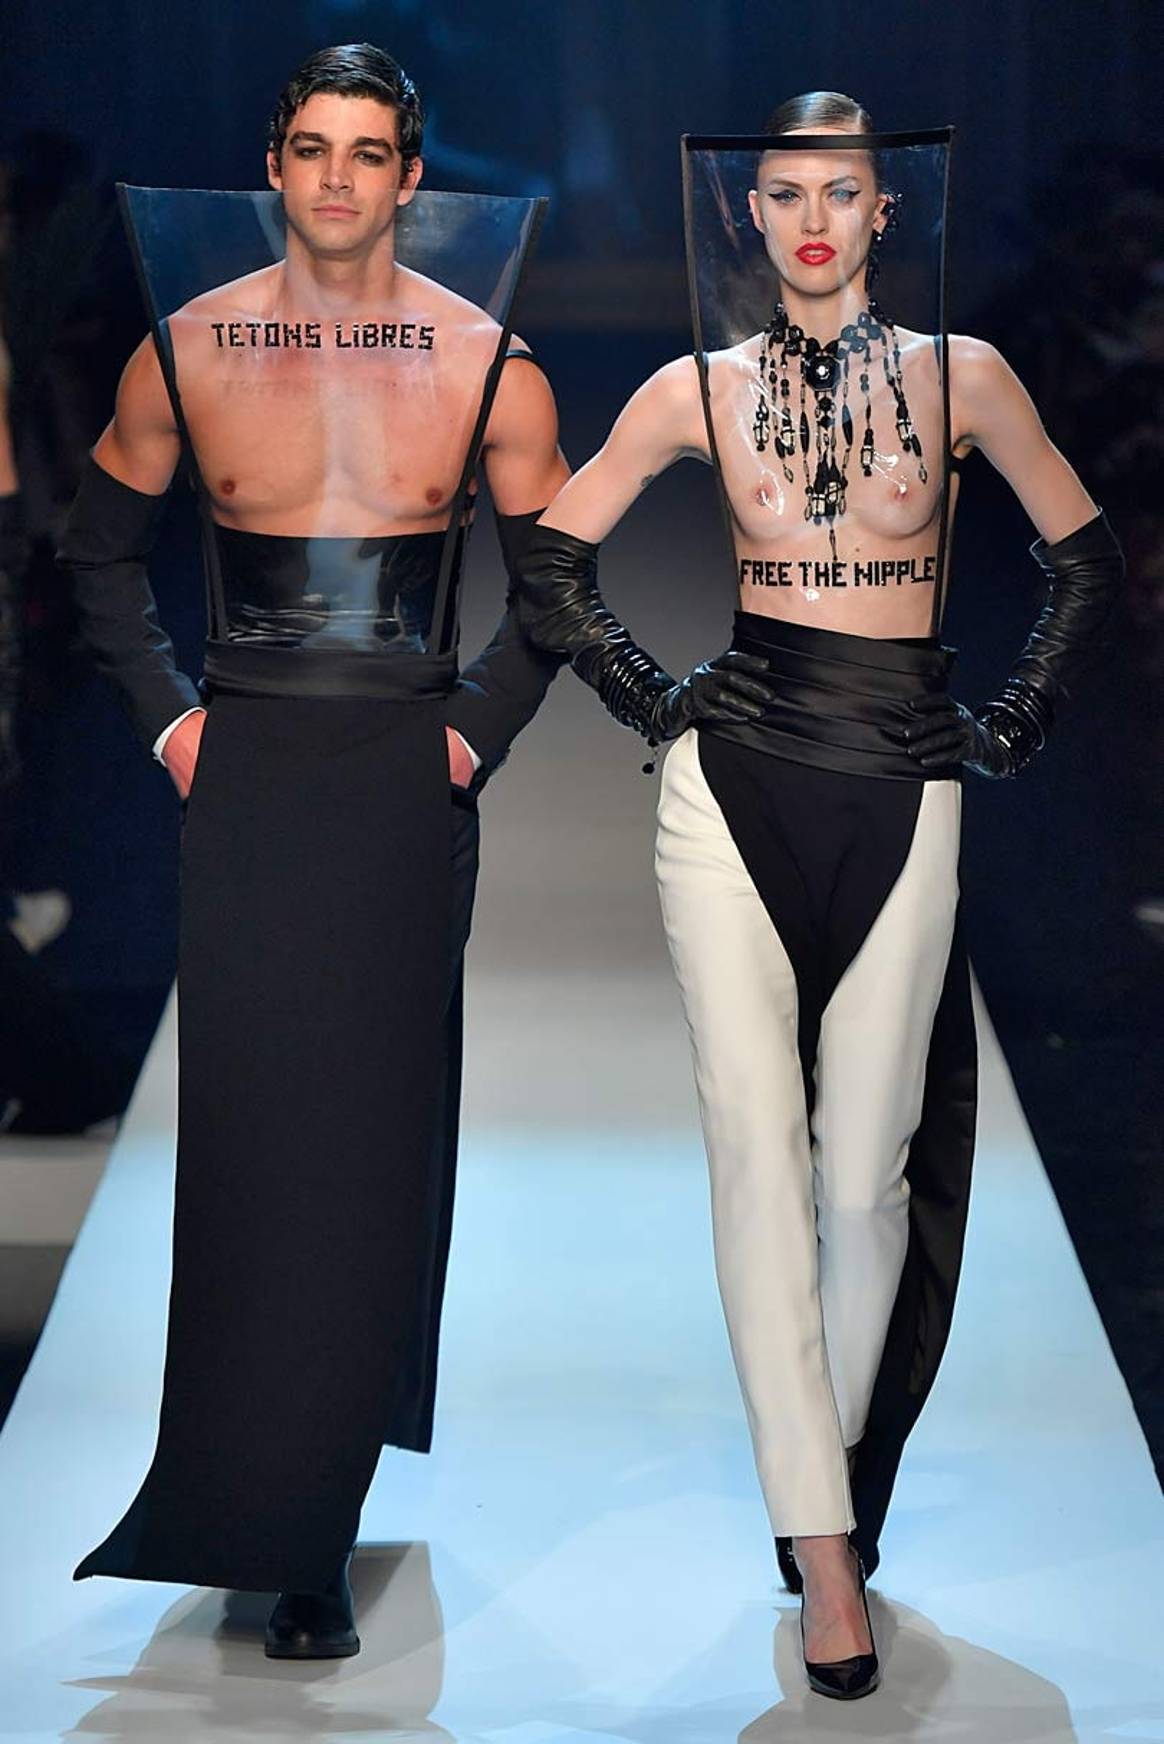 Gaultier joins bra wars with 'Free the nipple' fashion slogan